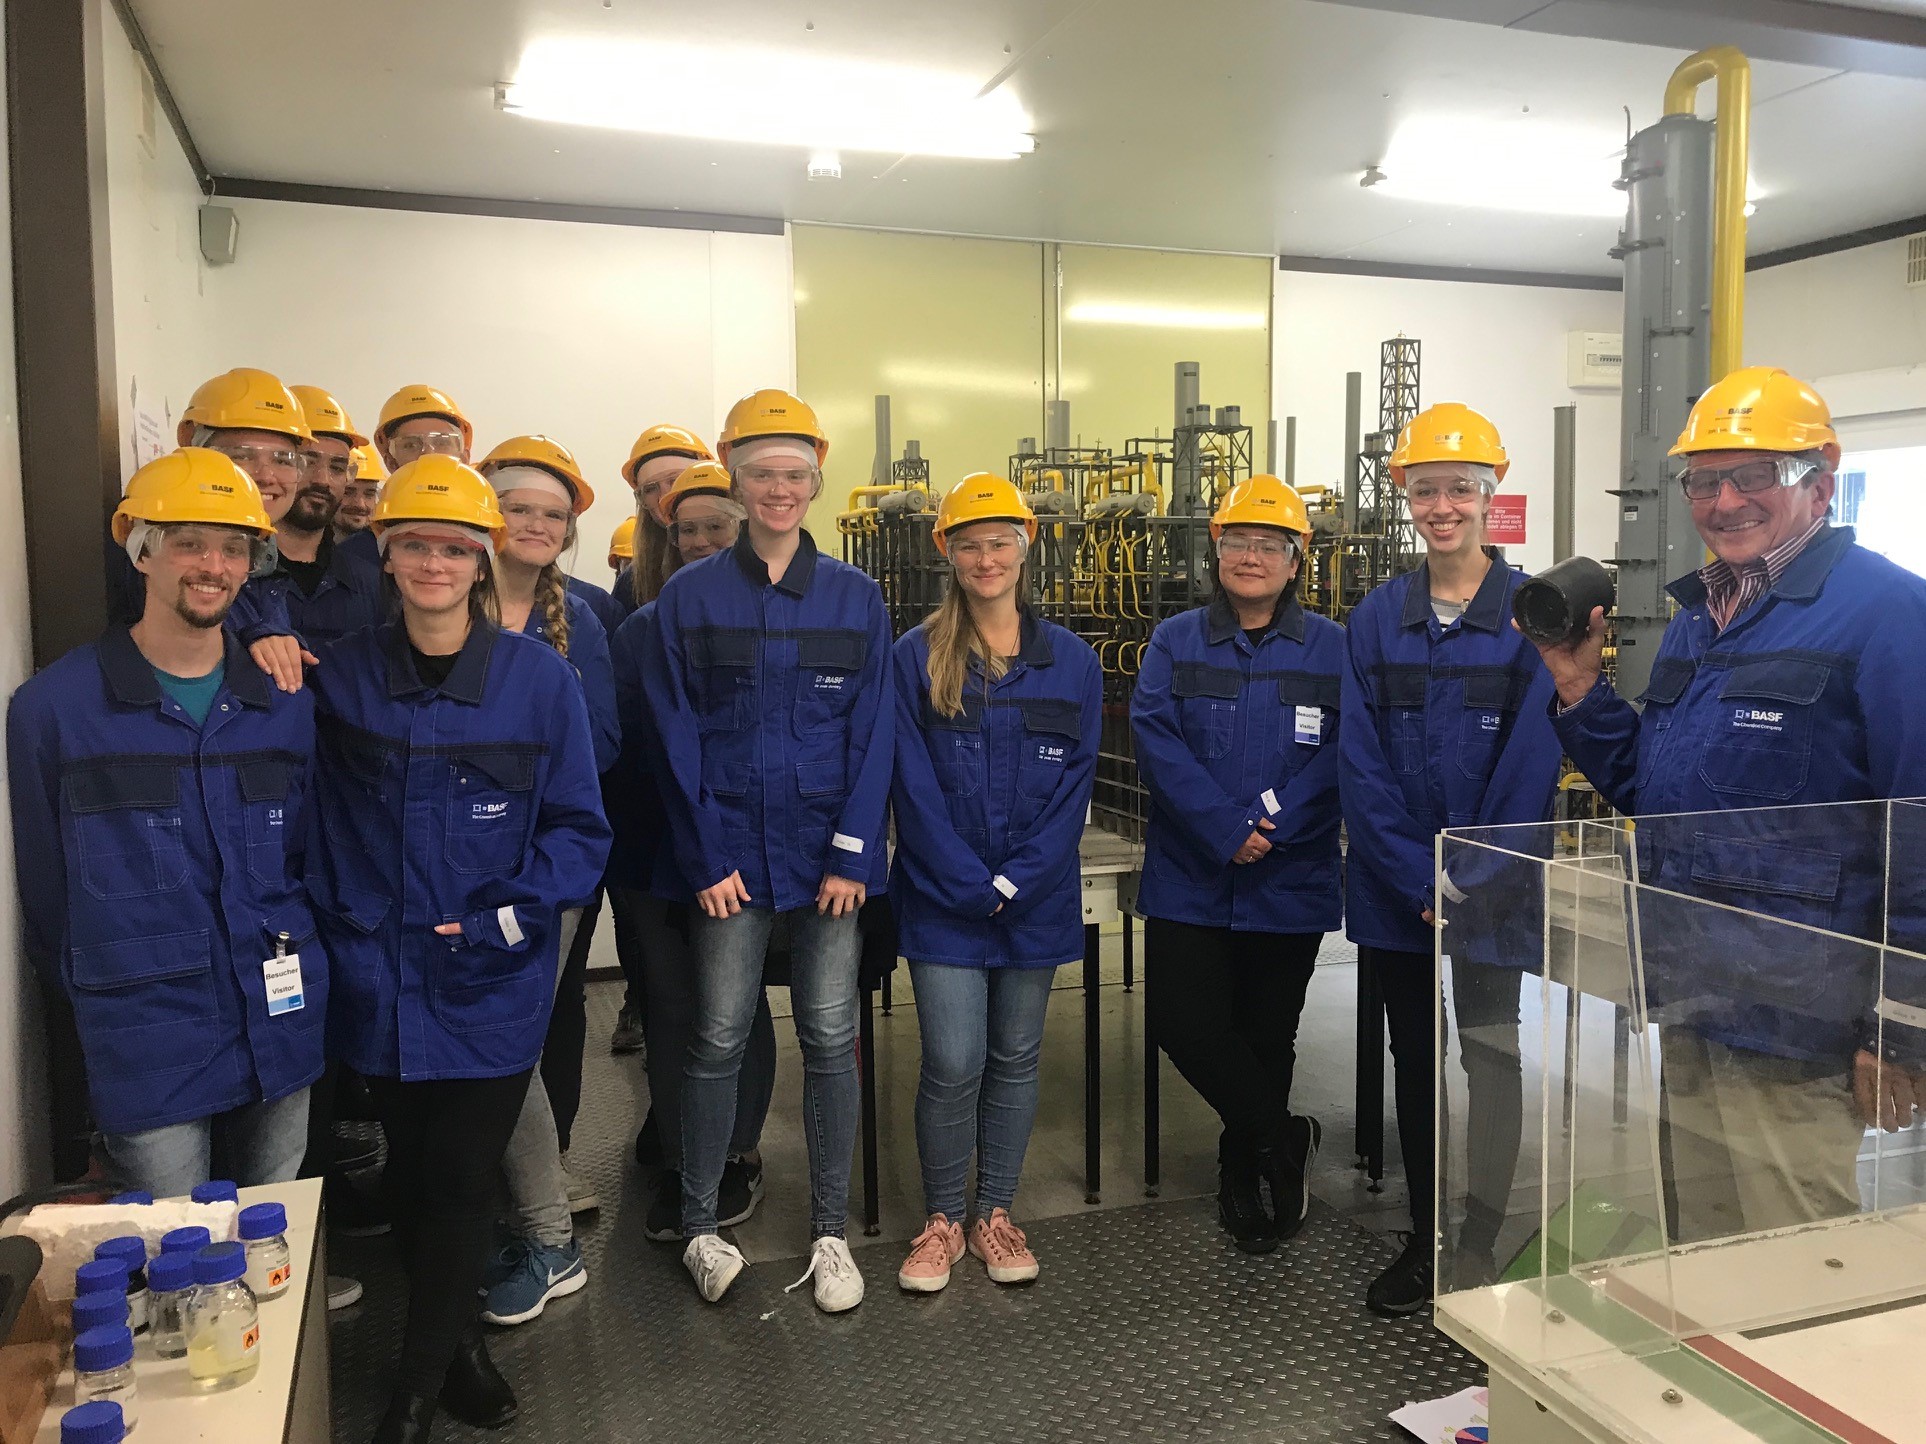 Excursion to BASF in Ludwigshafen